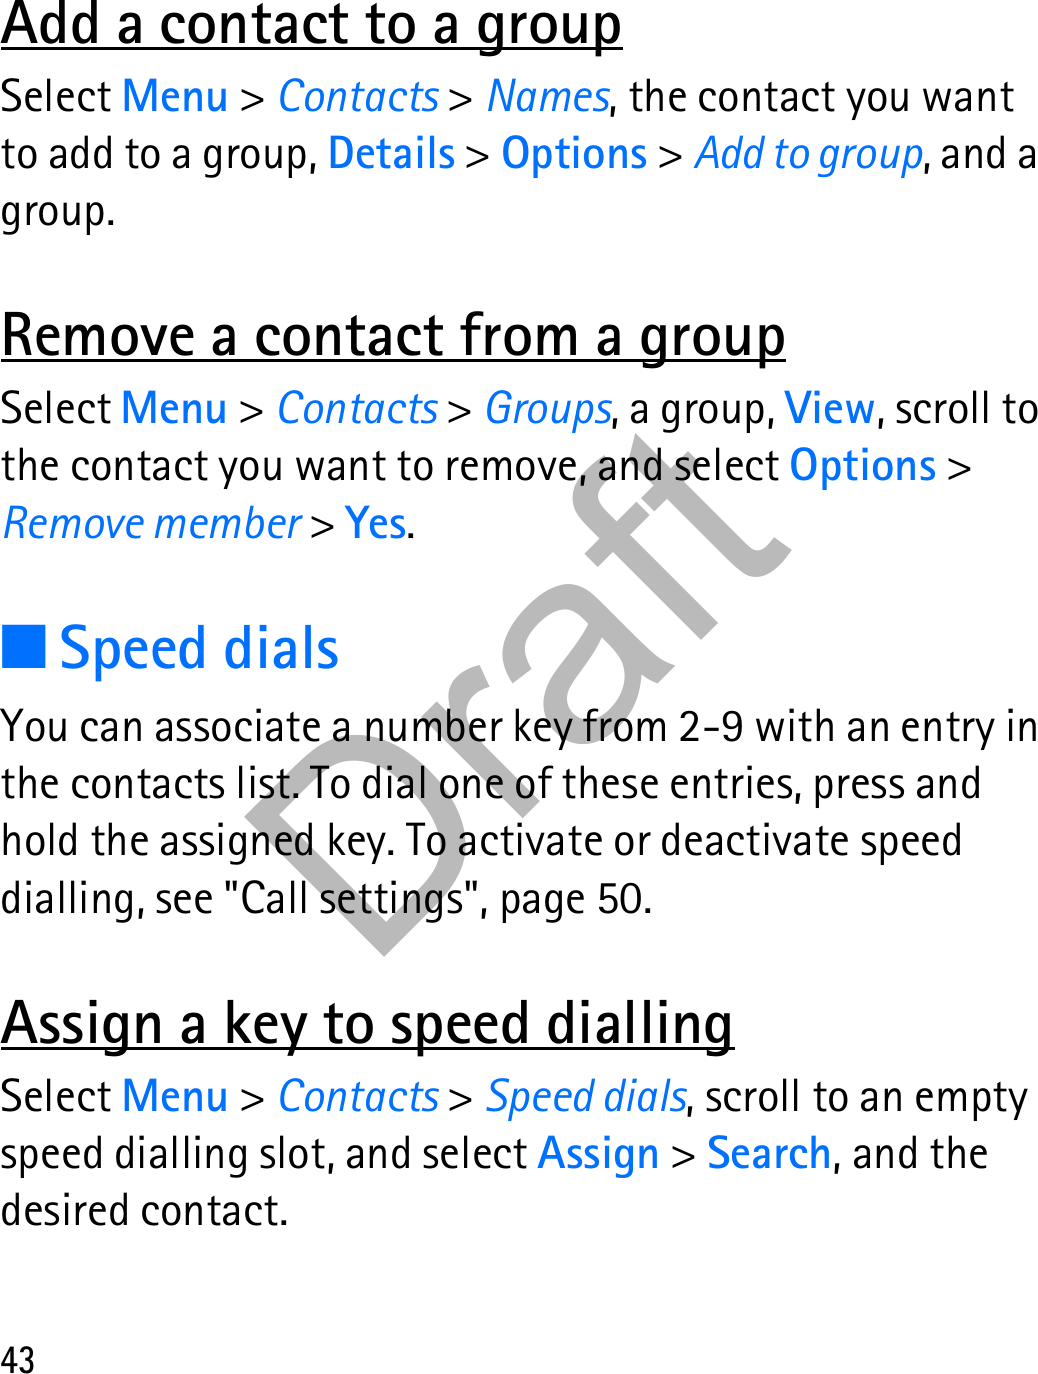 43Add a contact to a groupSelect Menu &gt; Contacts &gt; Names, the contact you want to add to a group, Details &gt; Options &gt; Add to group, and a group.Remove a contact from a groupSelect Menu &gt; Contacts &gt; Groups, a group, View, scroll to the contact you want to remove, and select Options &gt; Remove member &gt; Yes.■Speed dialsYou can associate a number key from 2-9 with an entry in the contacts list. To dial one of these entries, press and hold the assigned key. To activate or deactivate speed dialling, see &quot;Call settings&quot;, page 50.Assign a key to speed diallingSelect Menu &gt; Contacts &gt; Speed dials, scroll to an empty speed dialling slot, and select Assign &gt; Search, and the desired contact.Draft